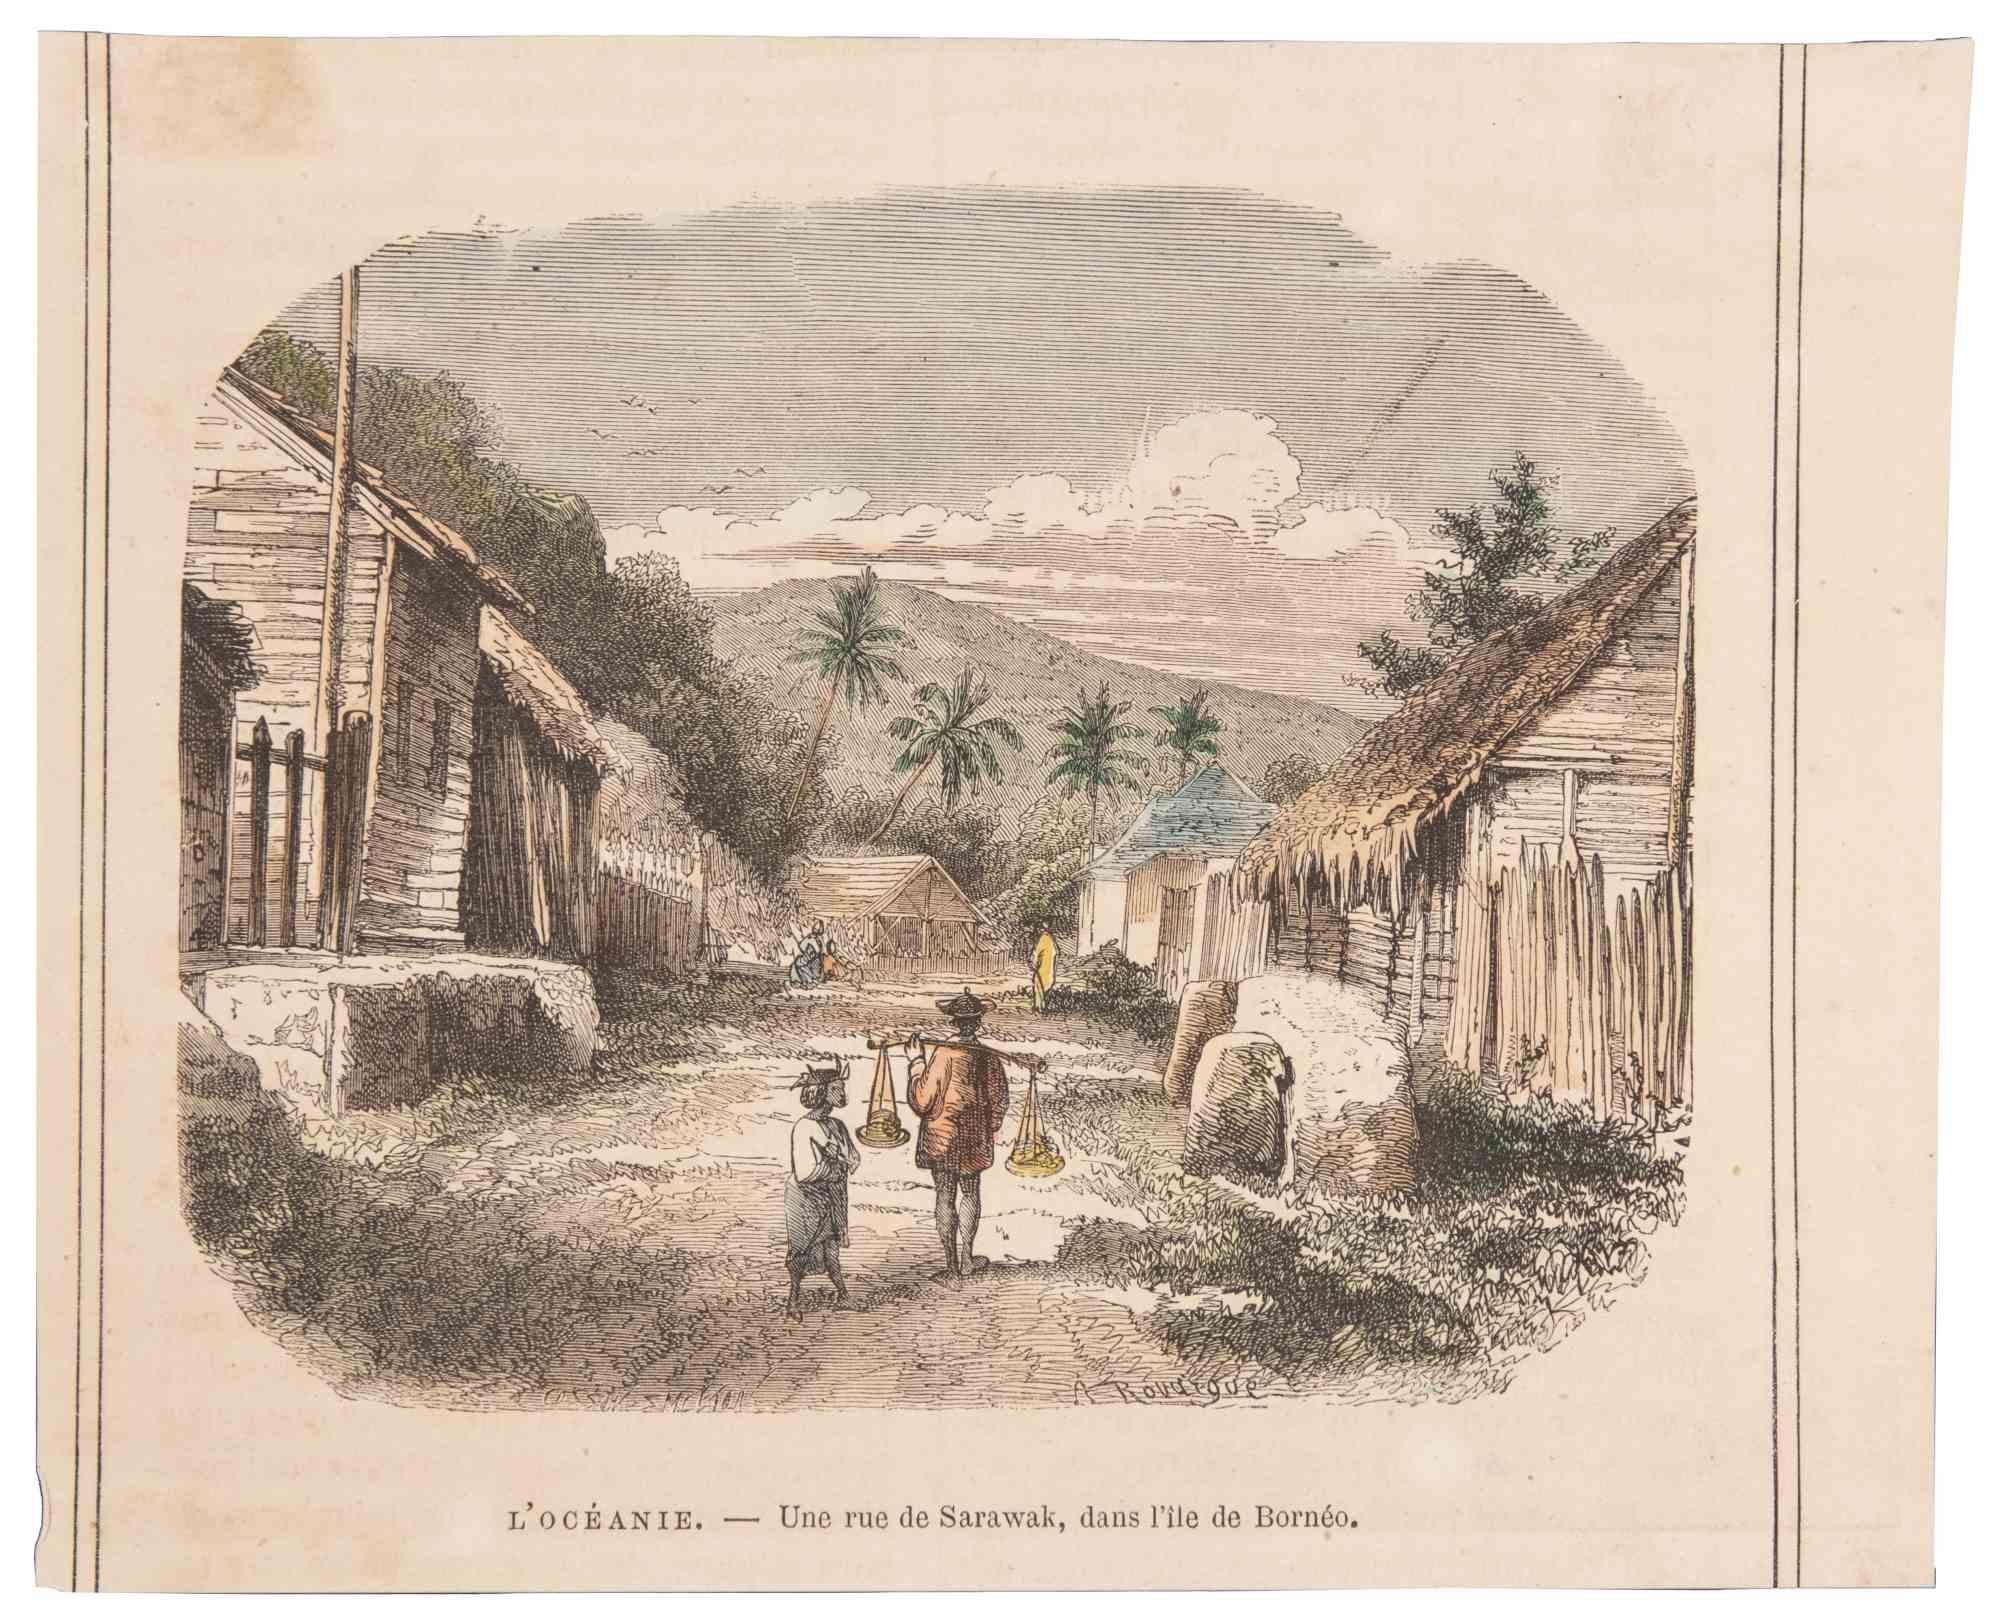 Unknown Landscape Print - Borneo Road of the Sarawack - Lithograph - 19th Century